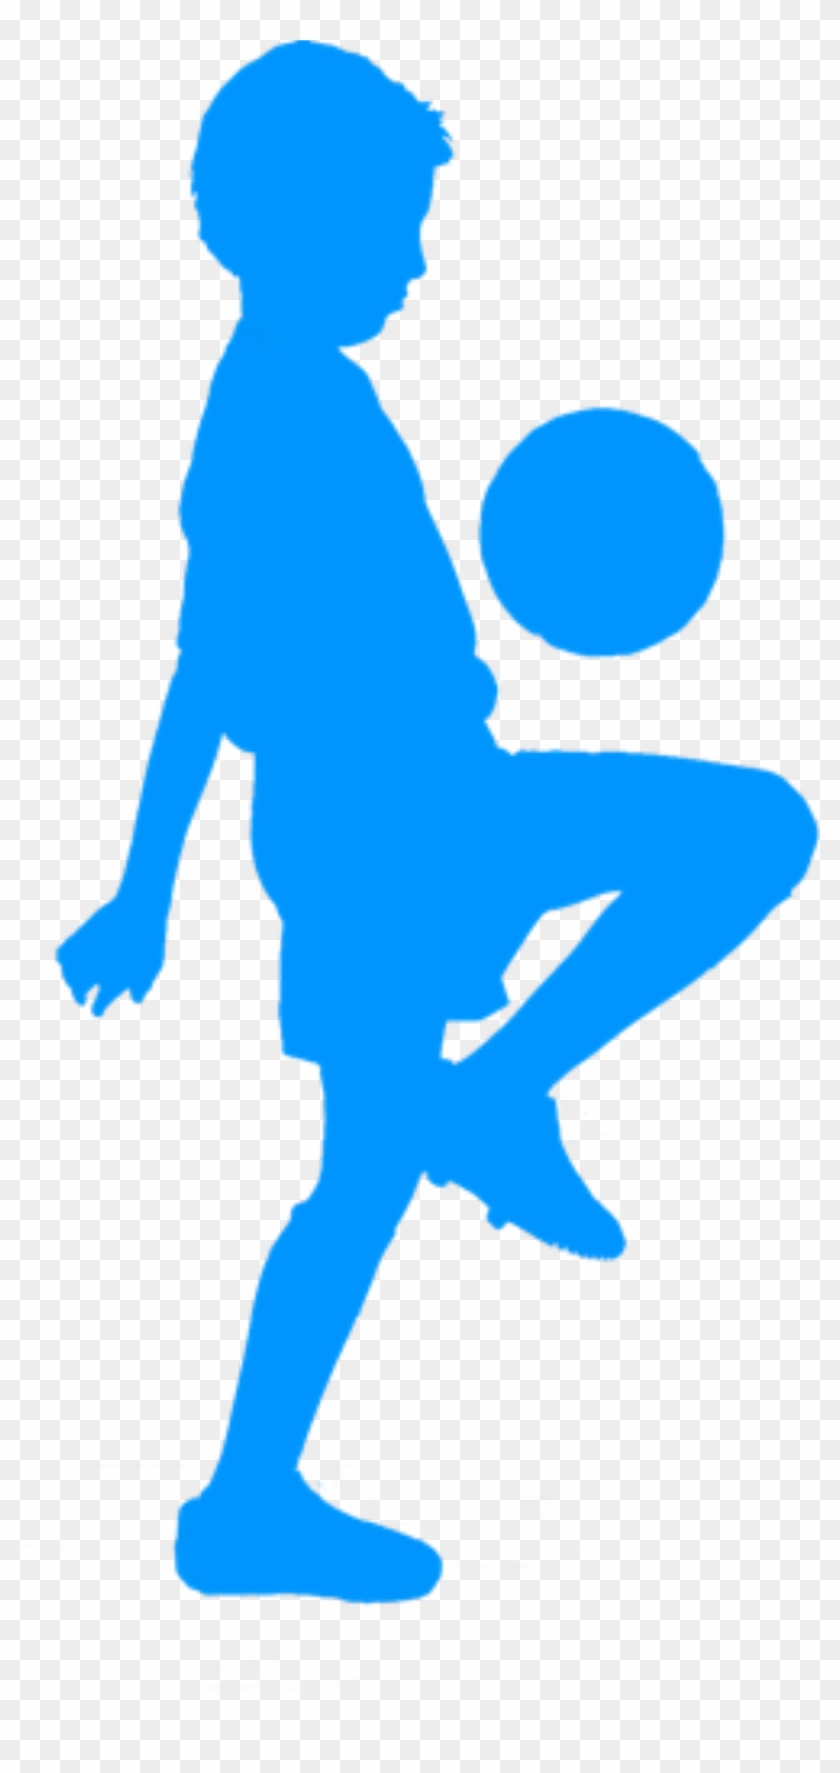 This Free Icons Png Design Of Silhouette Football 06 Clipart #1369552